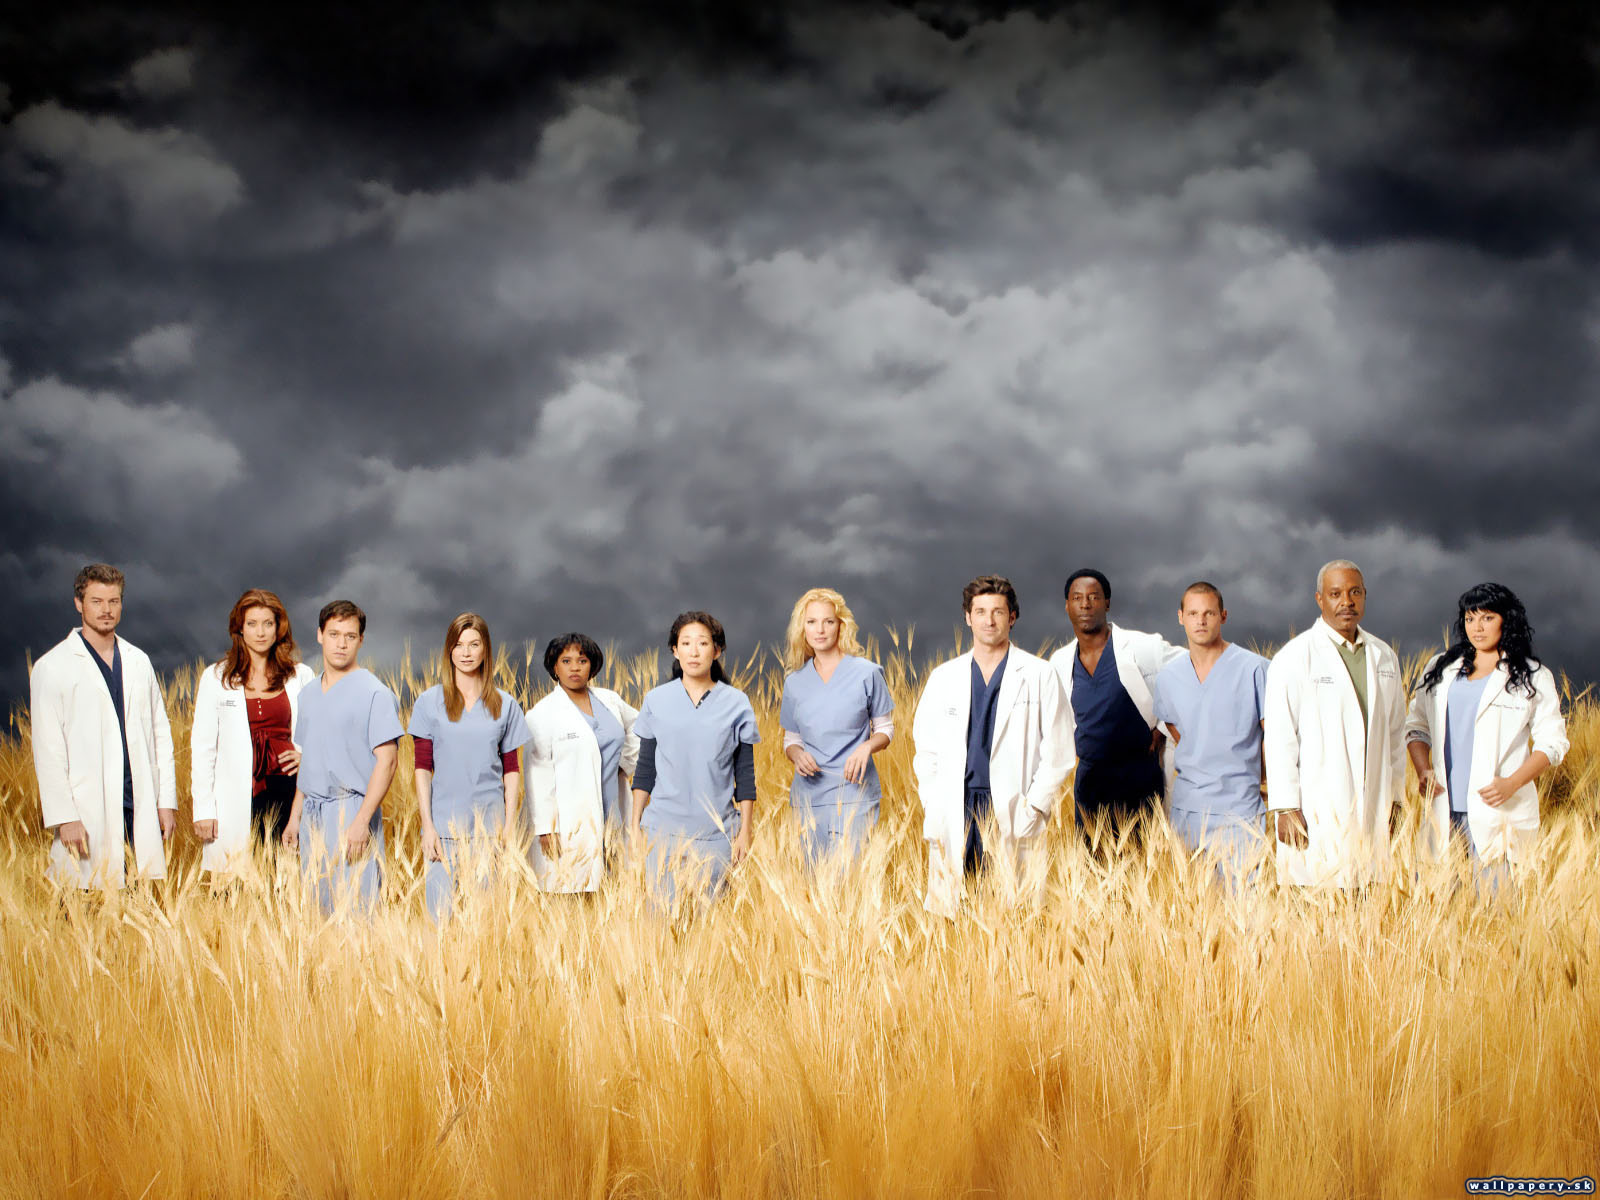 Greys Anatomy: The Video Game - wallpaper 35